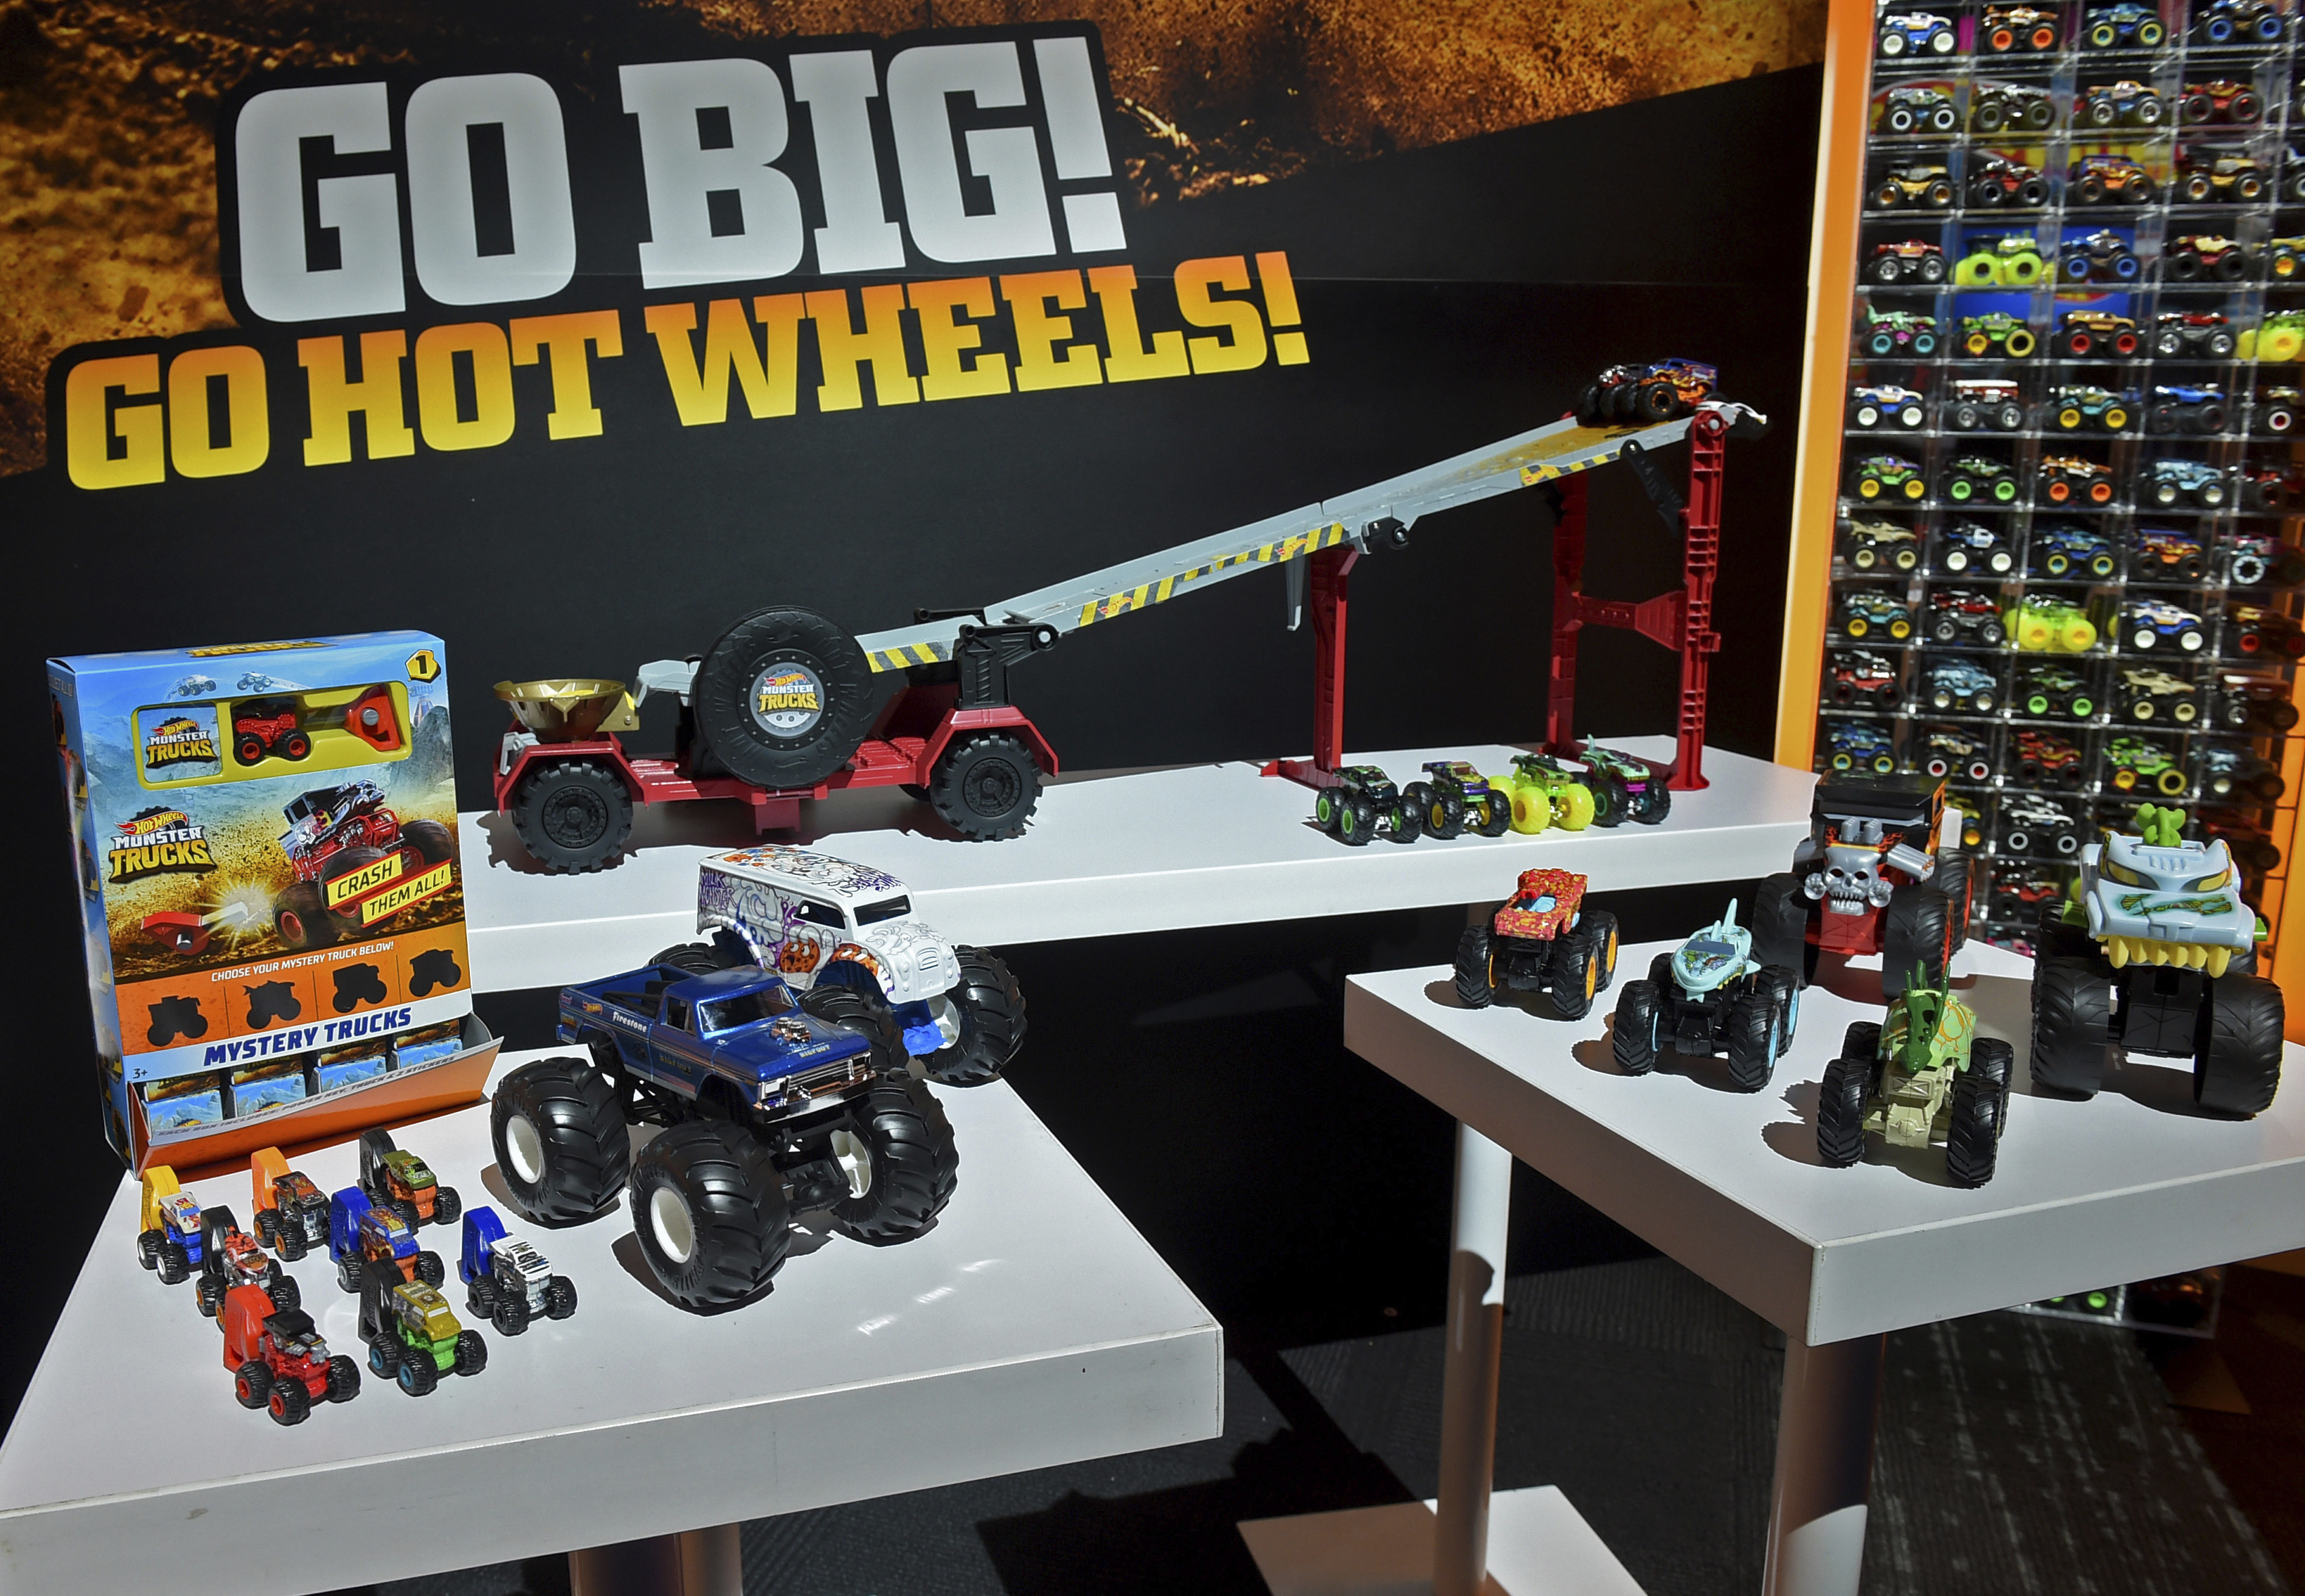 IMAGE DISTRIBUTED FOR MATTEL - Following the 50th anniversary celebration in 2018, Hot Wheels reveals a new collection of Monster Trucks vehicles and playsets at the New York Toy Fair, Friday, Feb. 15, 2019. (Diane Bondareff/AP Images for Mattel)